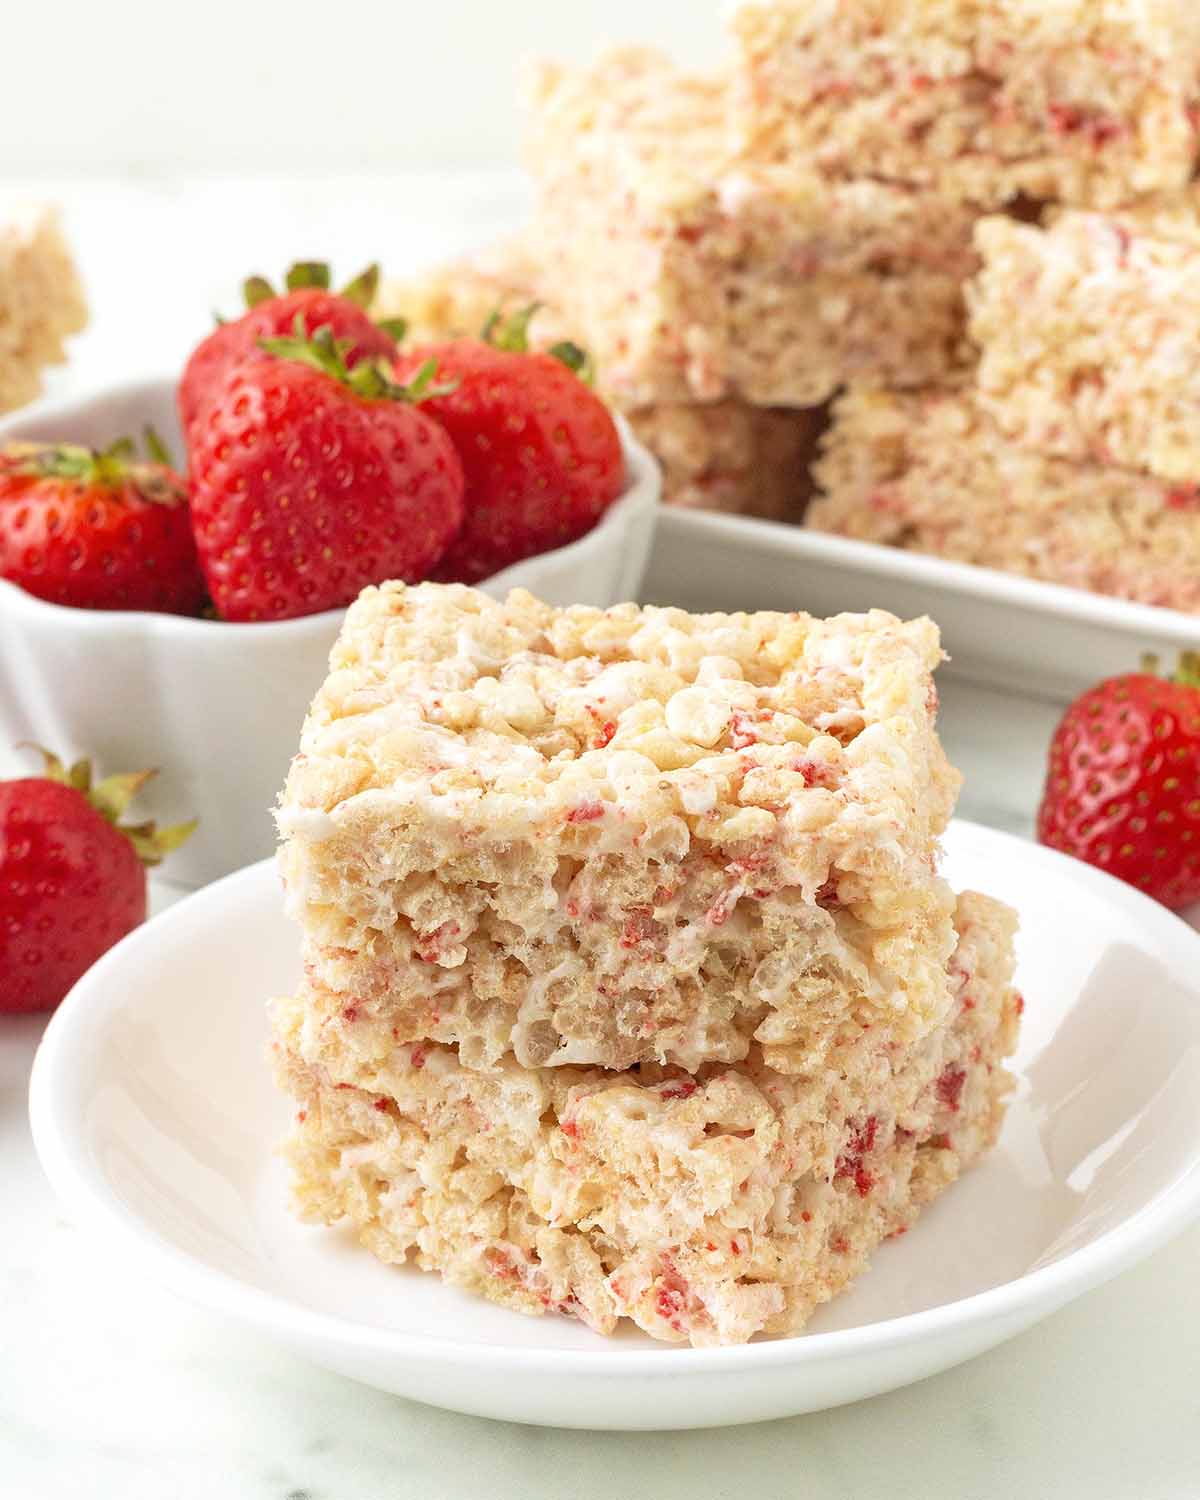 Two strawberry rice crispy treats on small plate, more treats and fresh strawberries sit in the background.